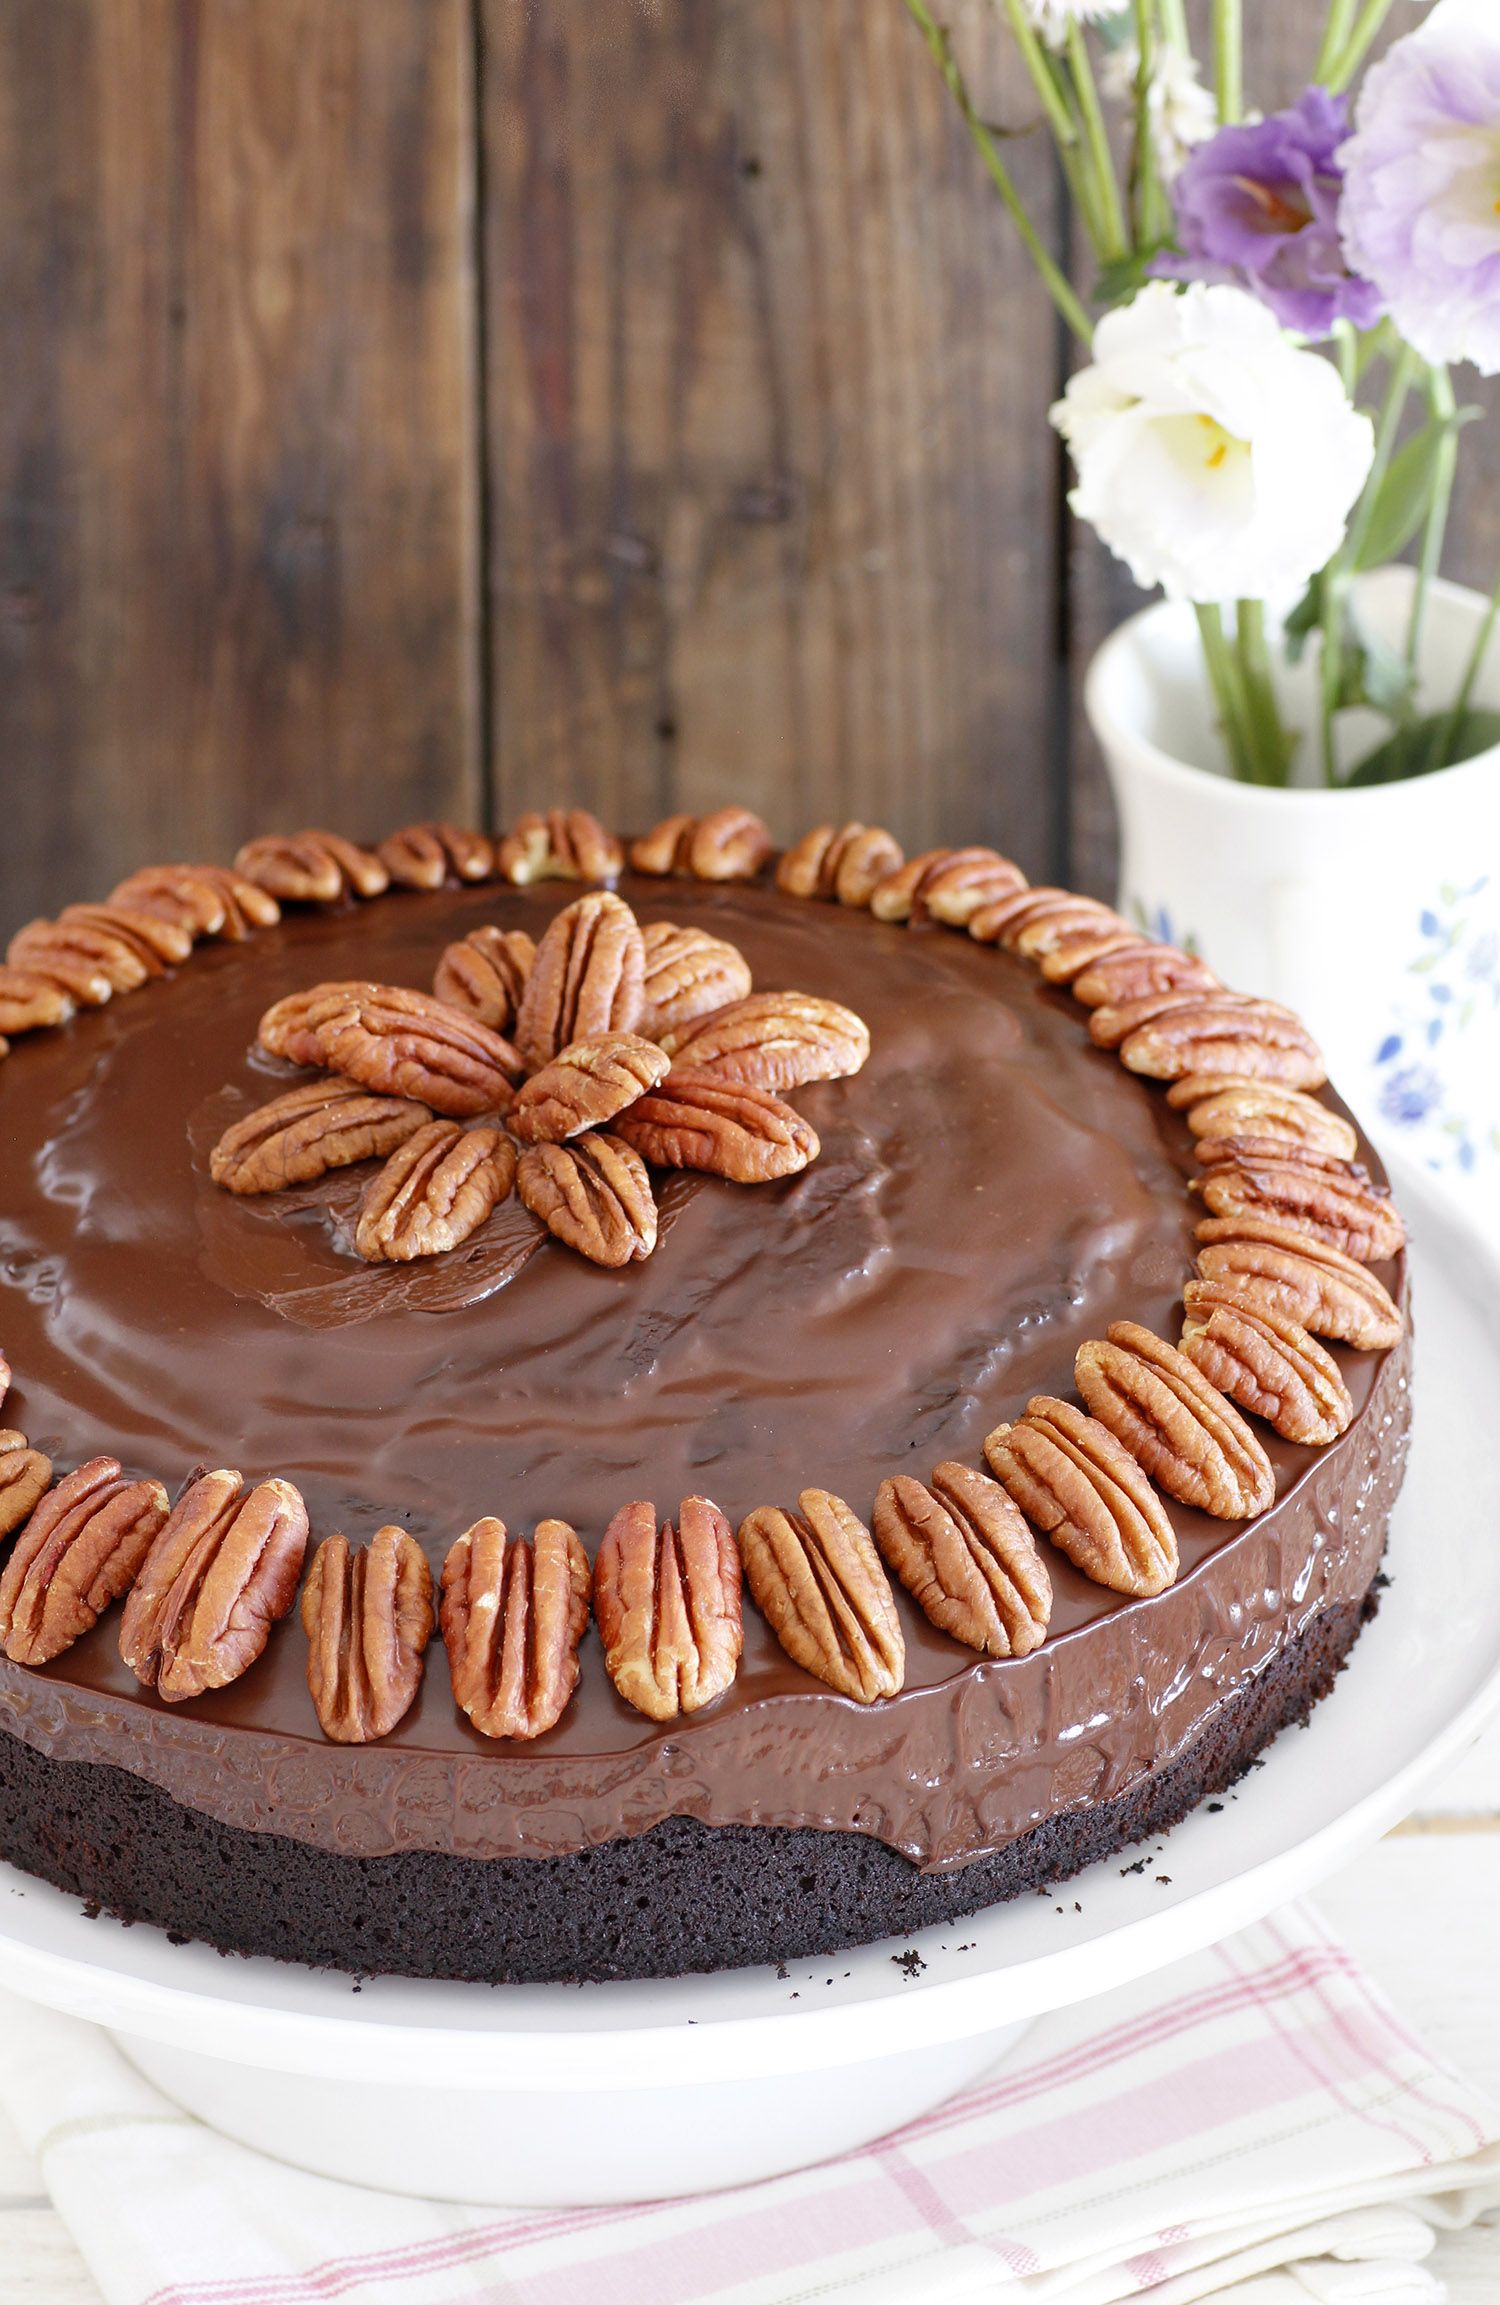 Chocolate Date Cake with Chocolate Frosting and Pecans